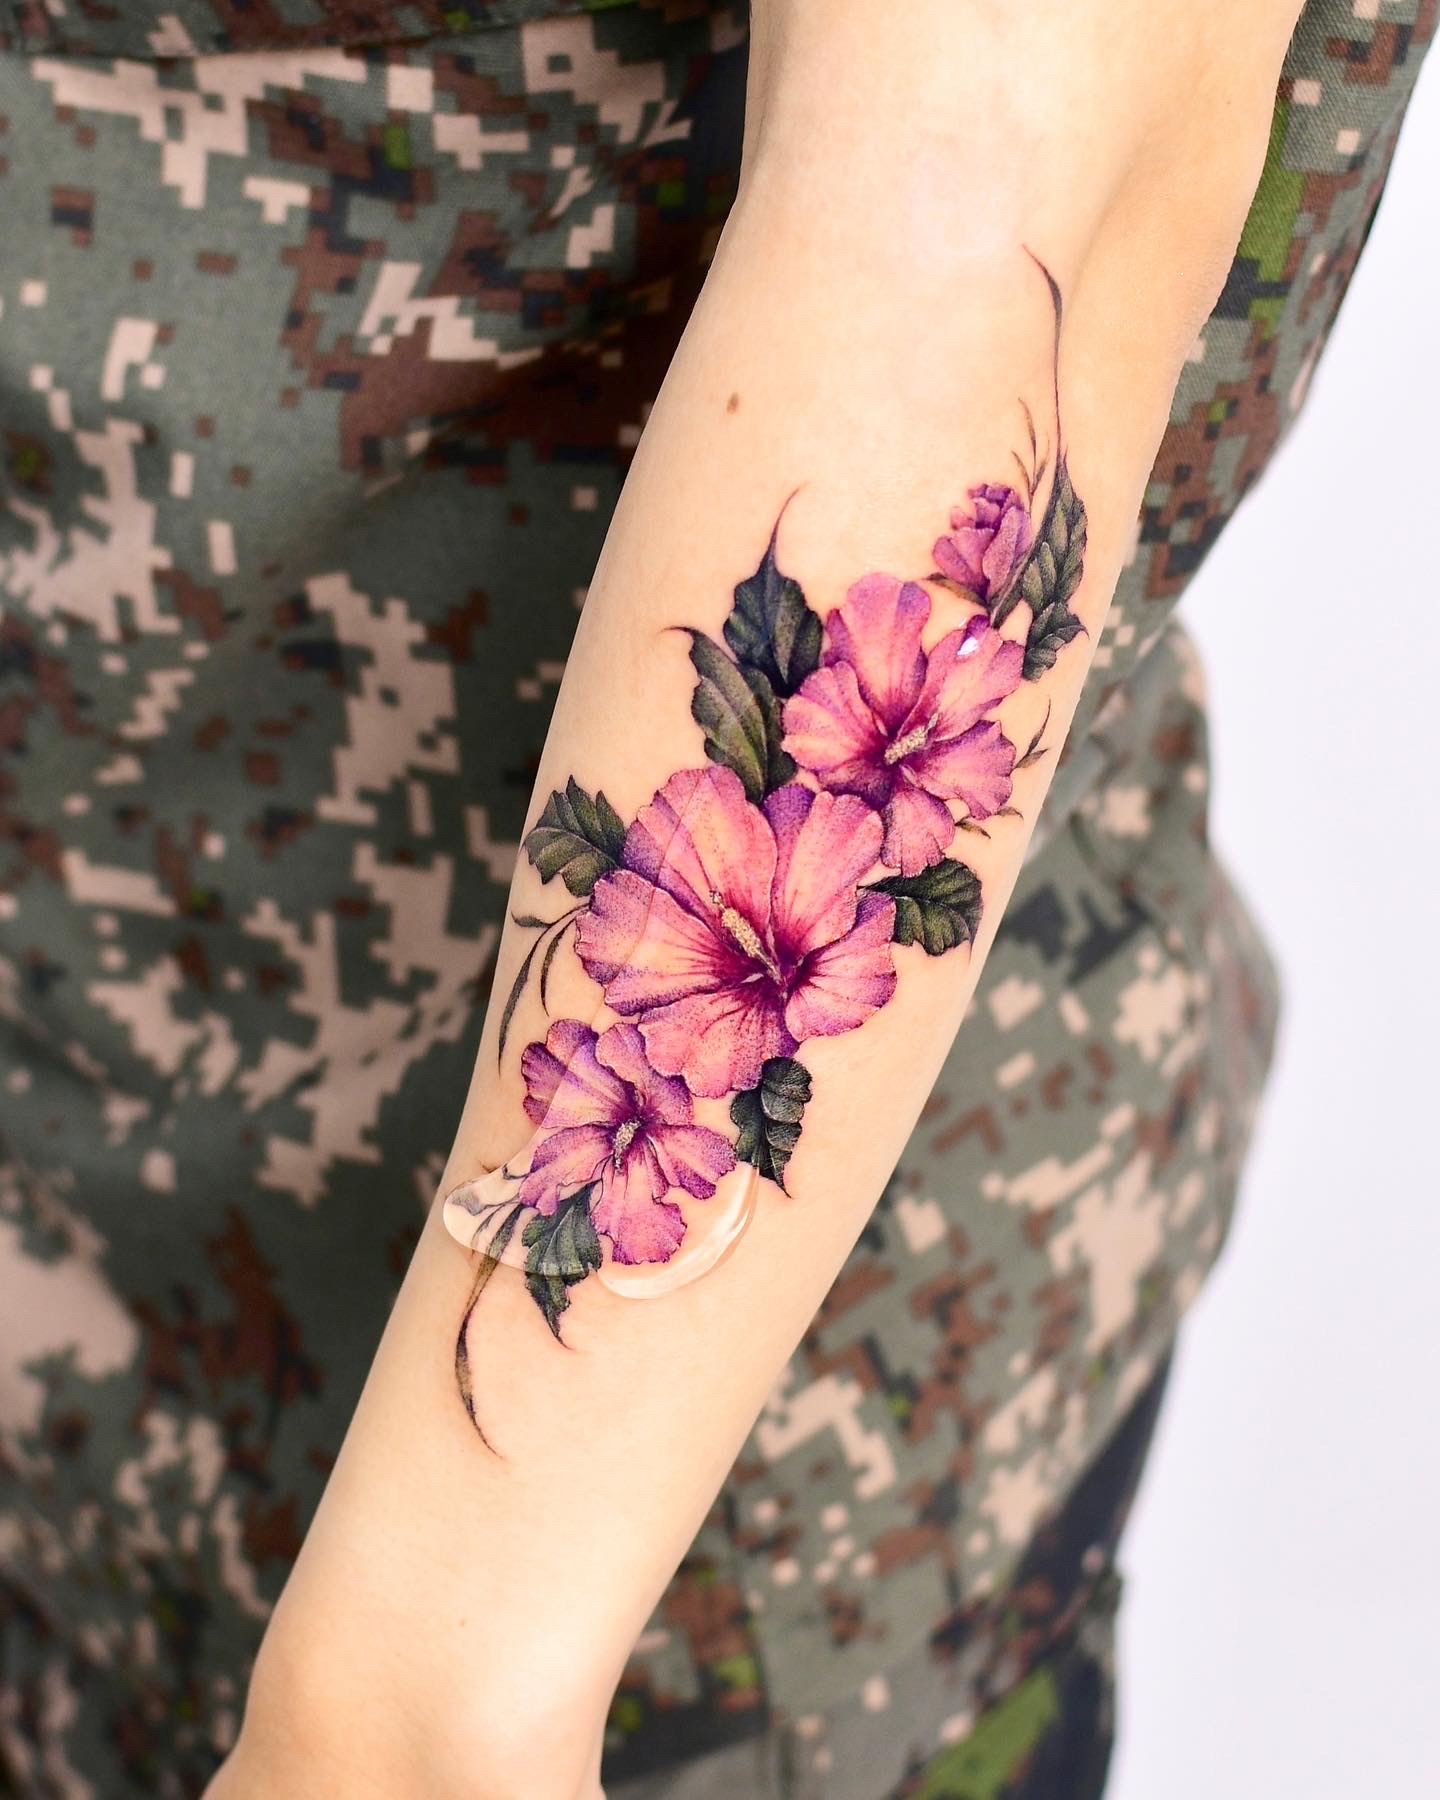 Tattoo cover up ideas by Inkaholik